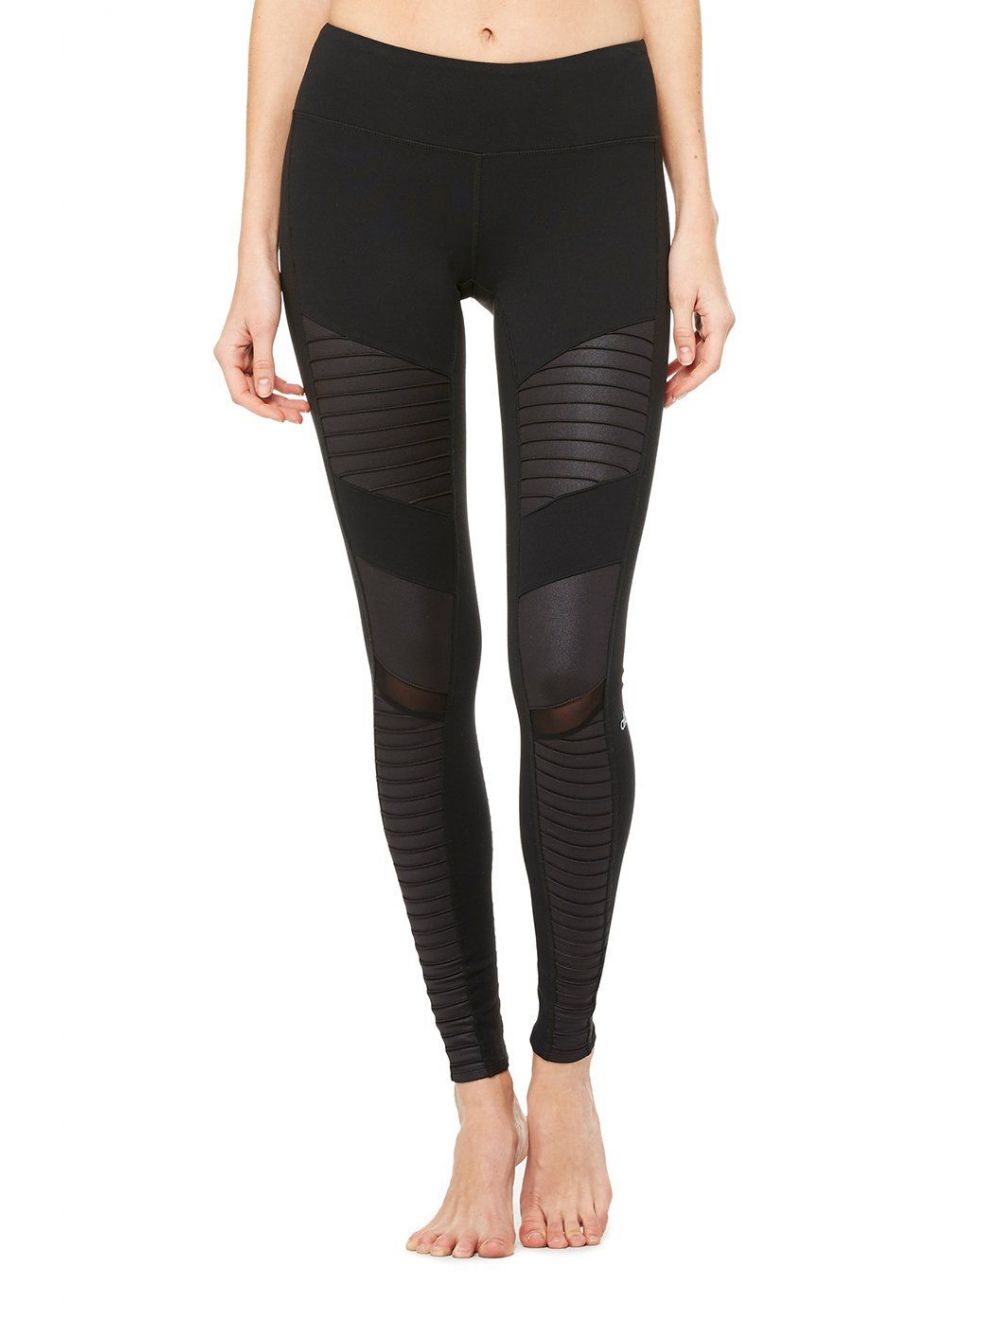 High-Waist Catch The Light Short in Black by Alo Yoga